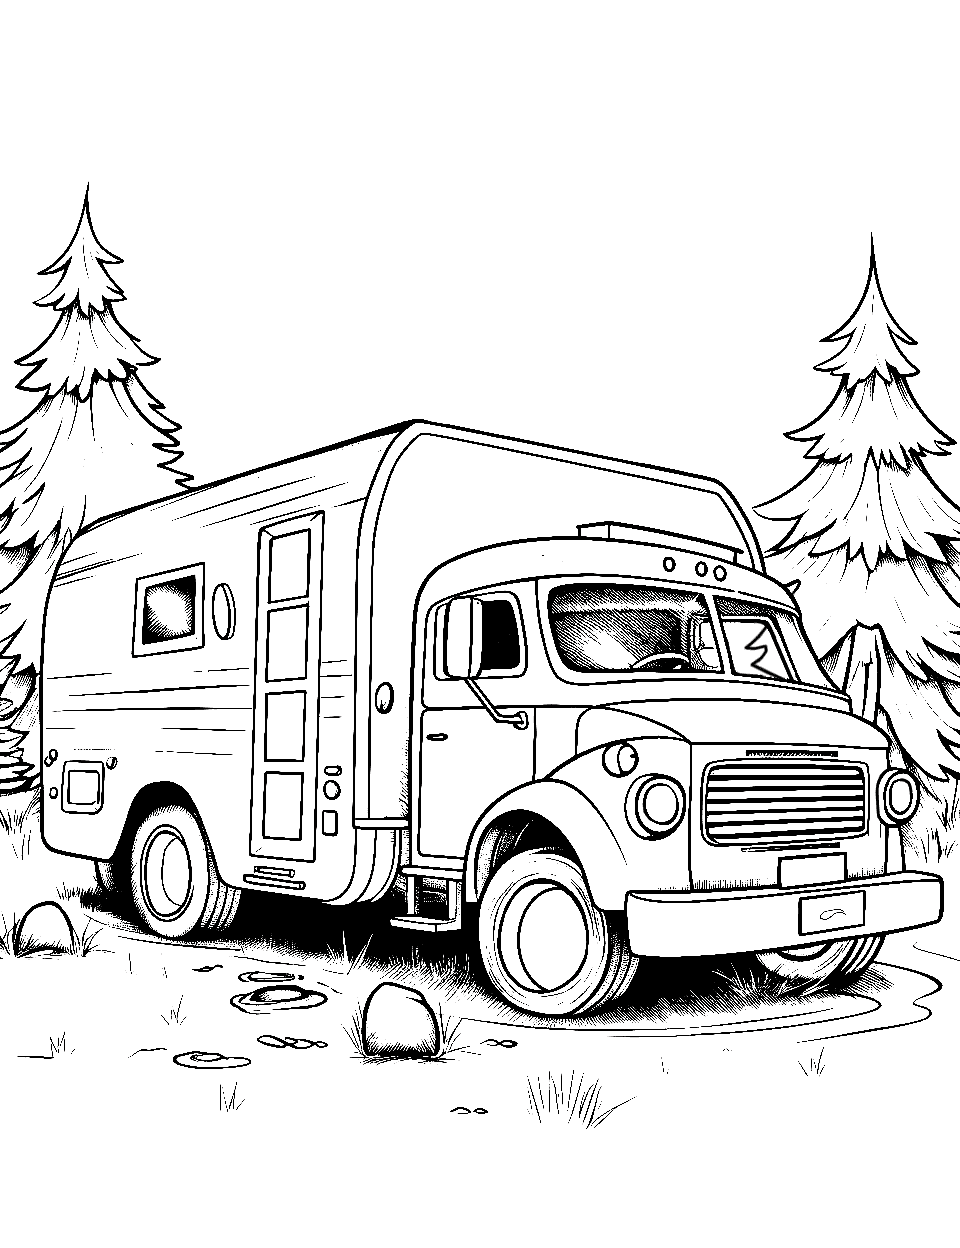 Camping Truck Parked Coloring Page - A Camping RV truck parked at a campsite.